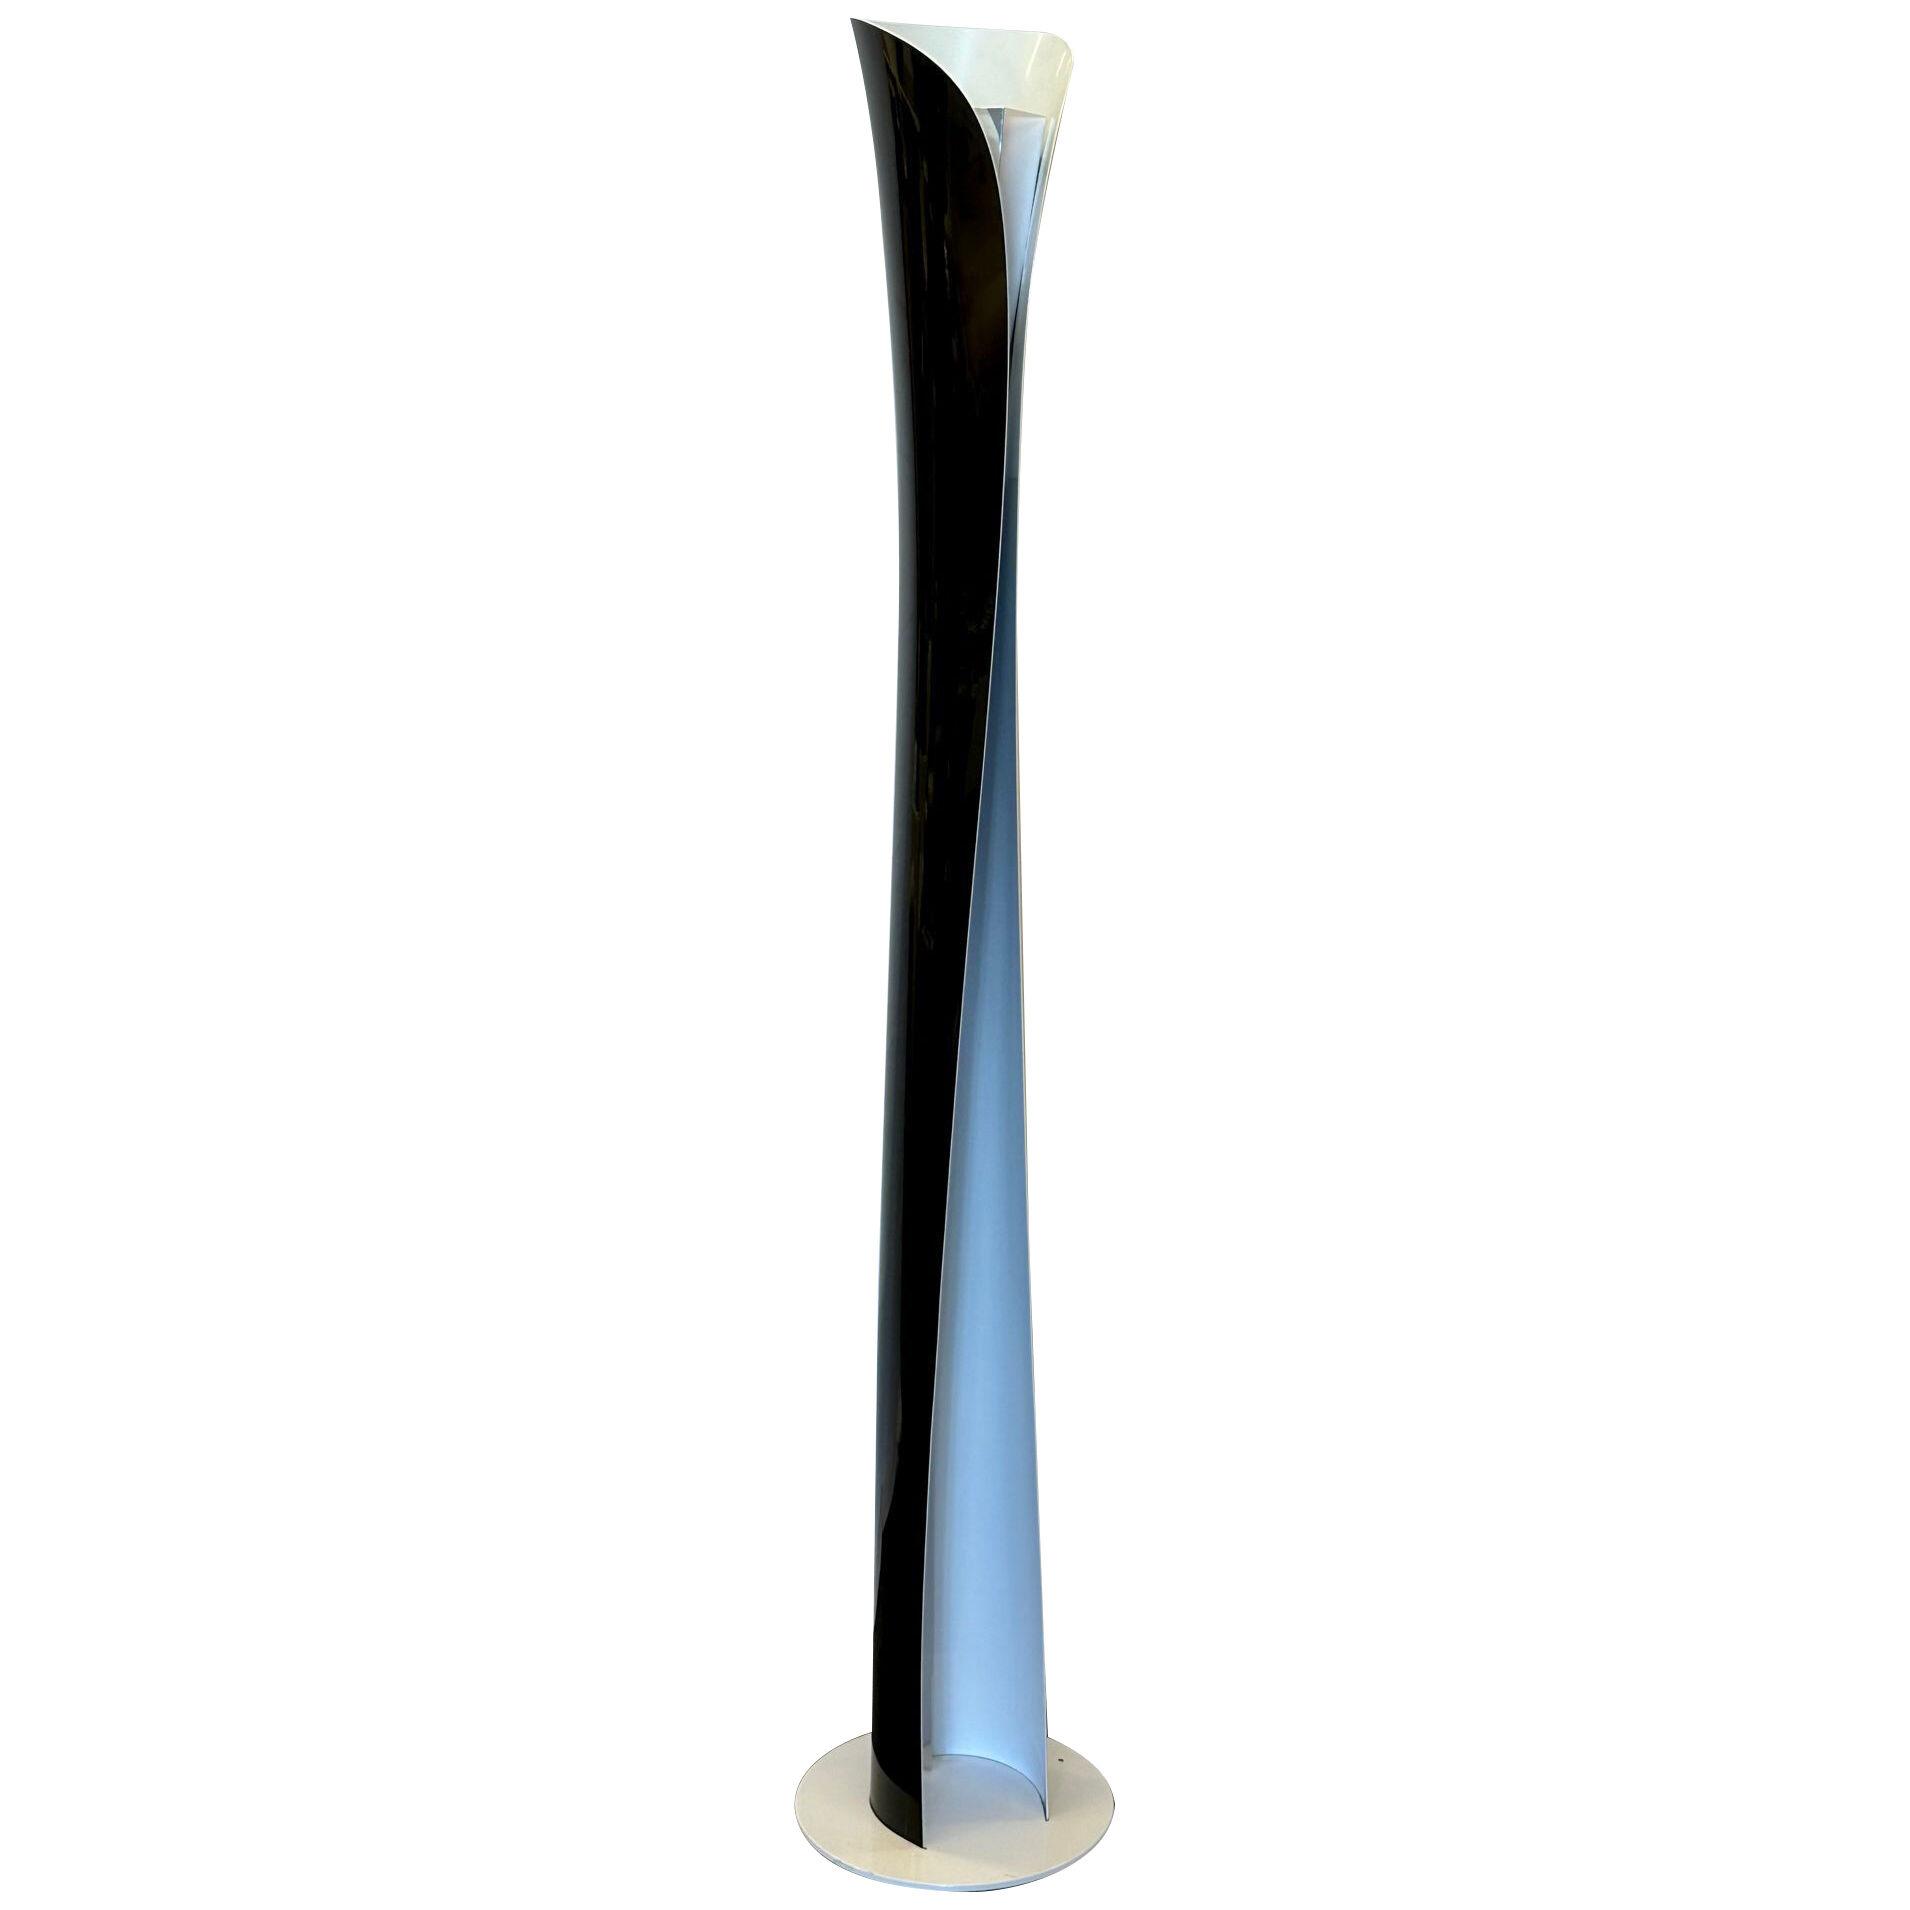 Vintage Mid-Century Modern Italian Lacquered Floor Lamp, Artemide, Labeled Italy